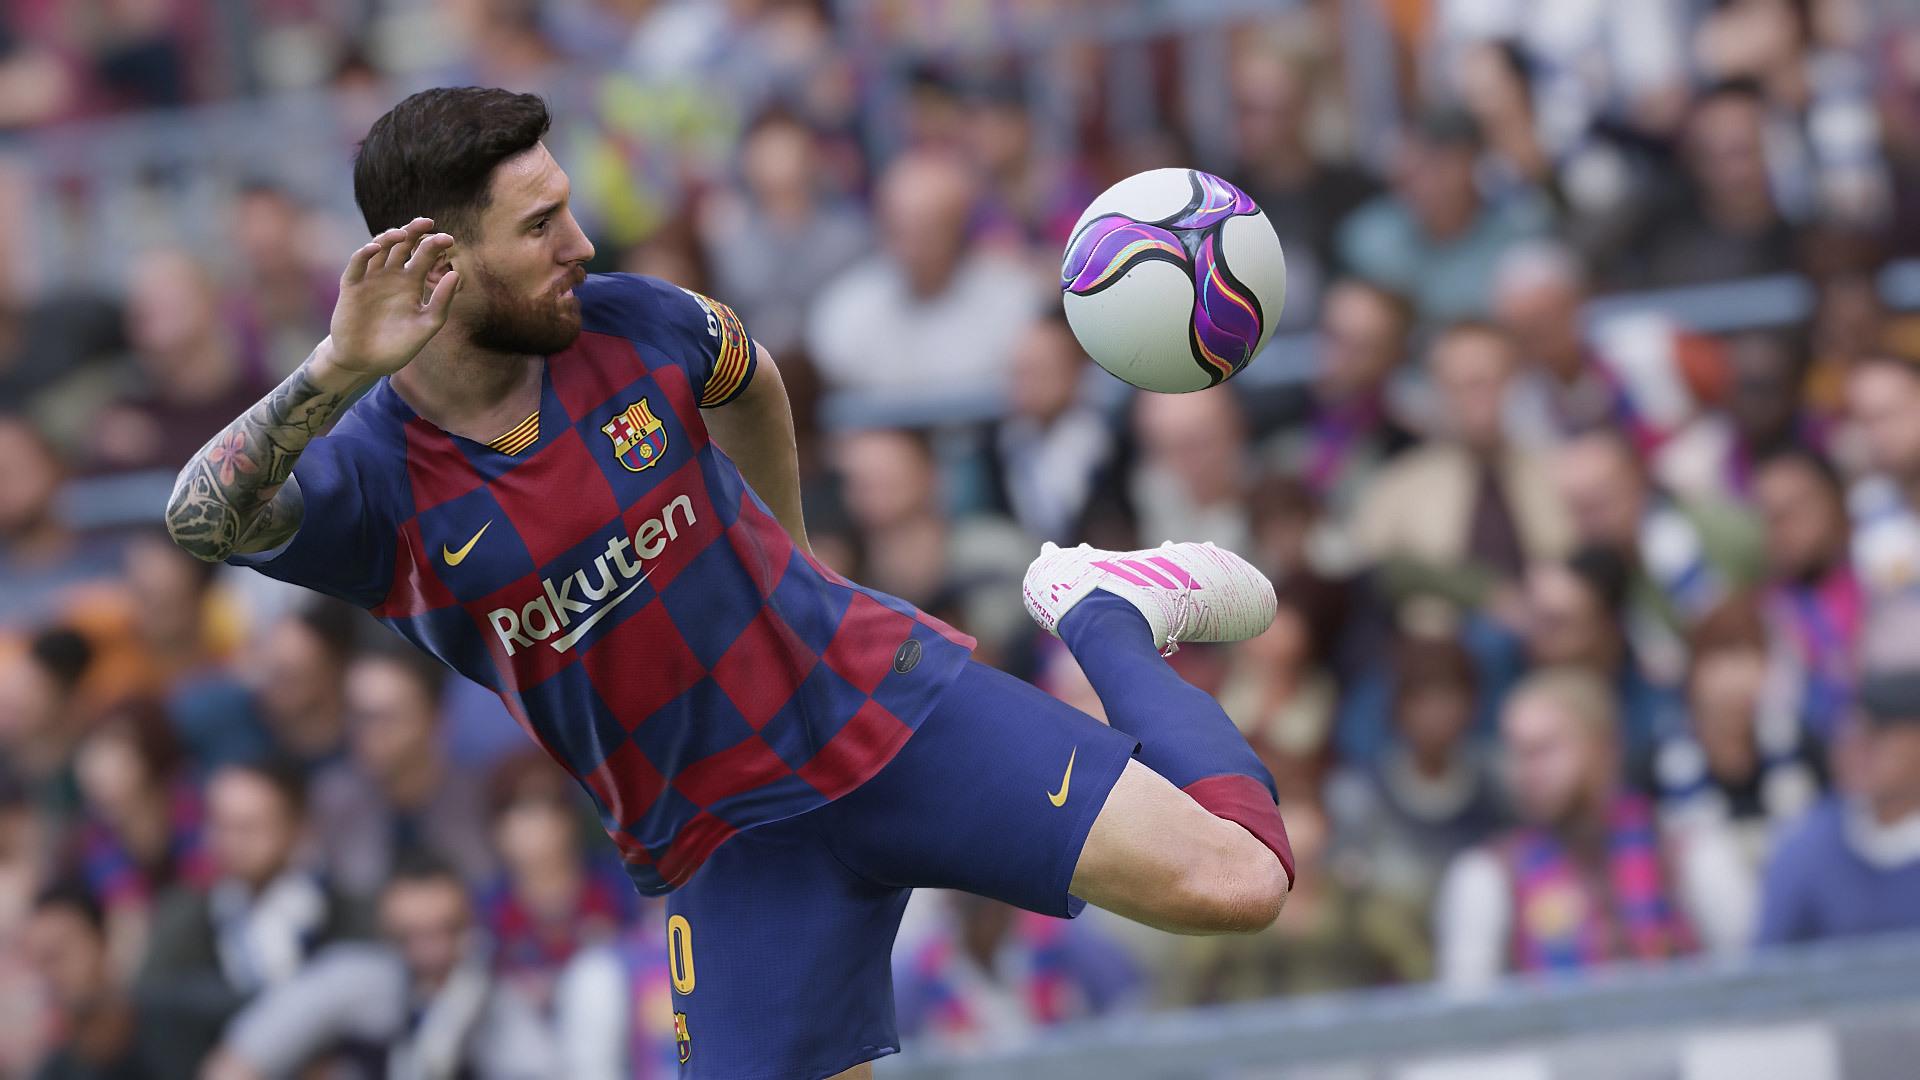 PES 2020 Snaps Up Another Exclusive Team License To Add To Its